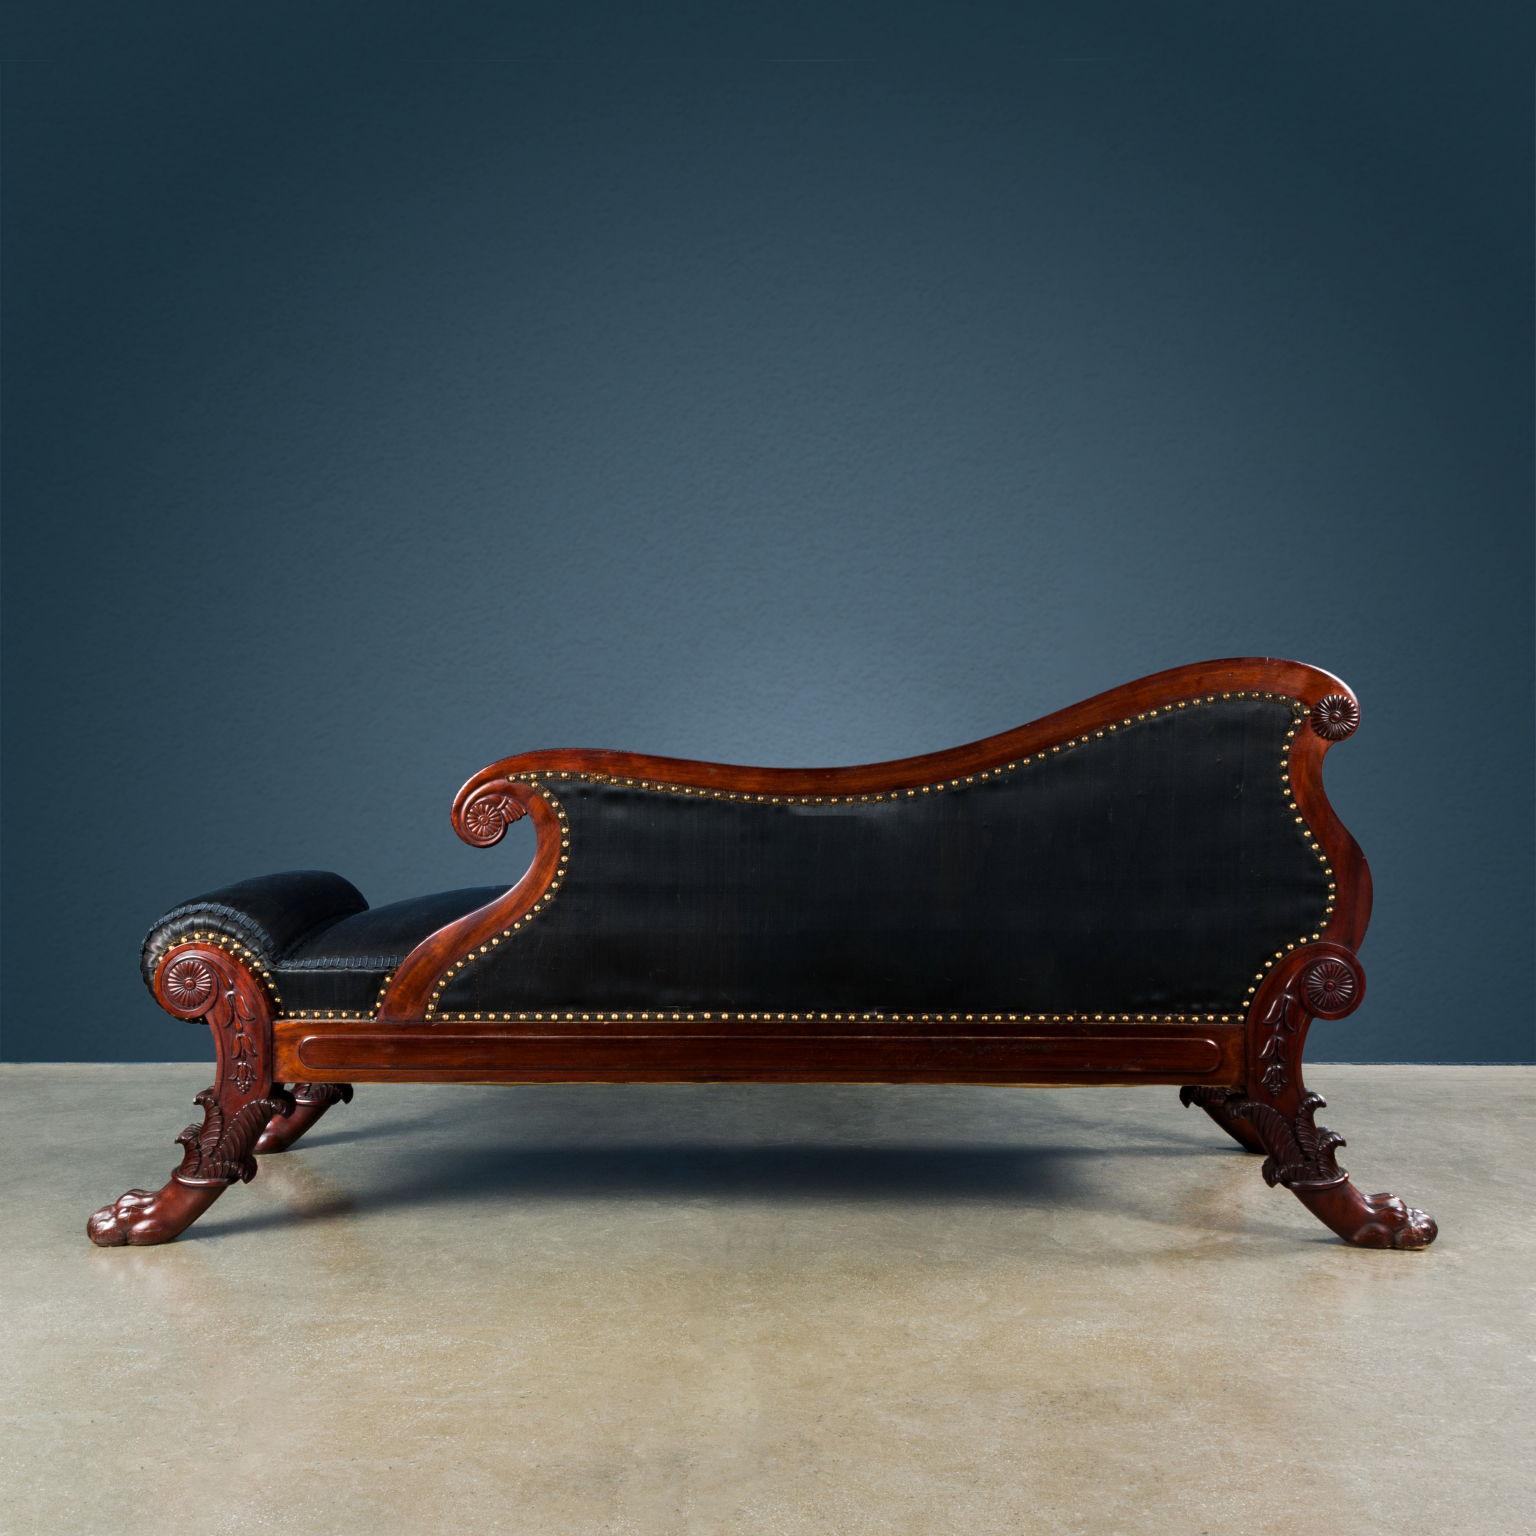 Dormeuse. Milan, c. 1860, black and brown For Sale 1